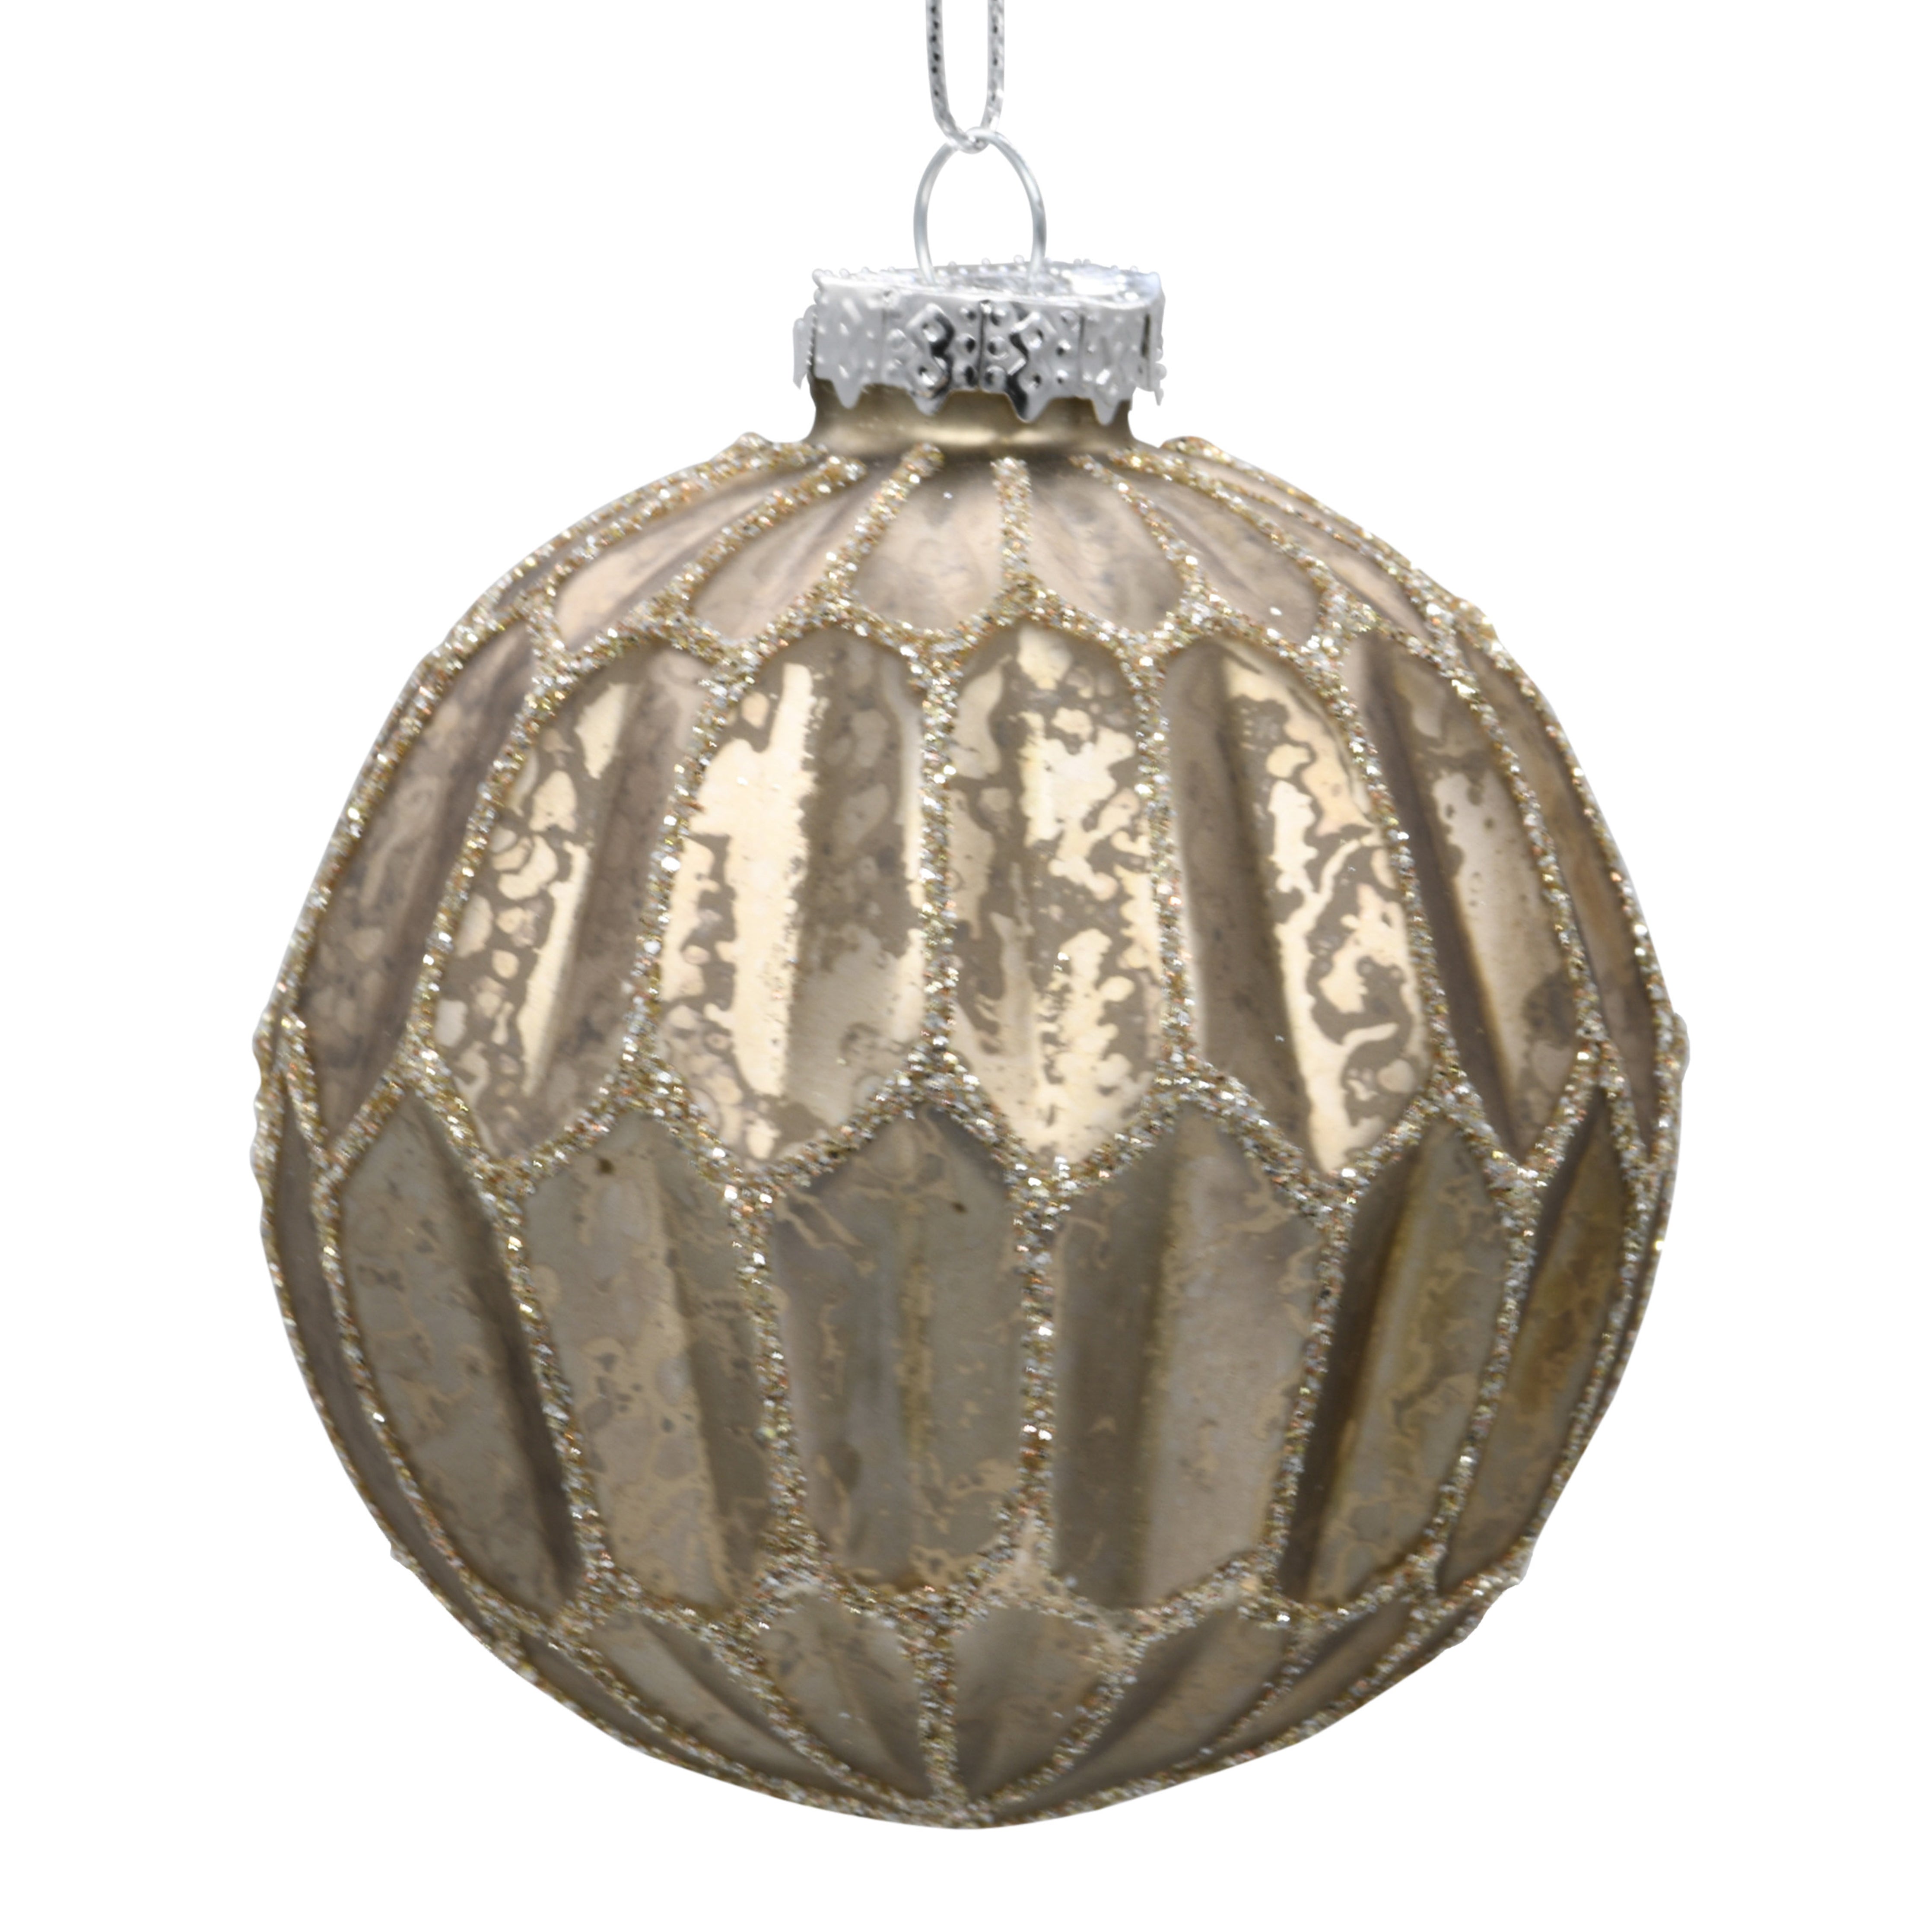 Bronze Christmas tree decoration on a white background